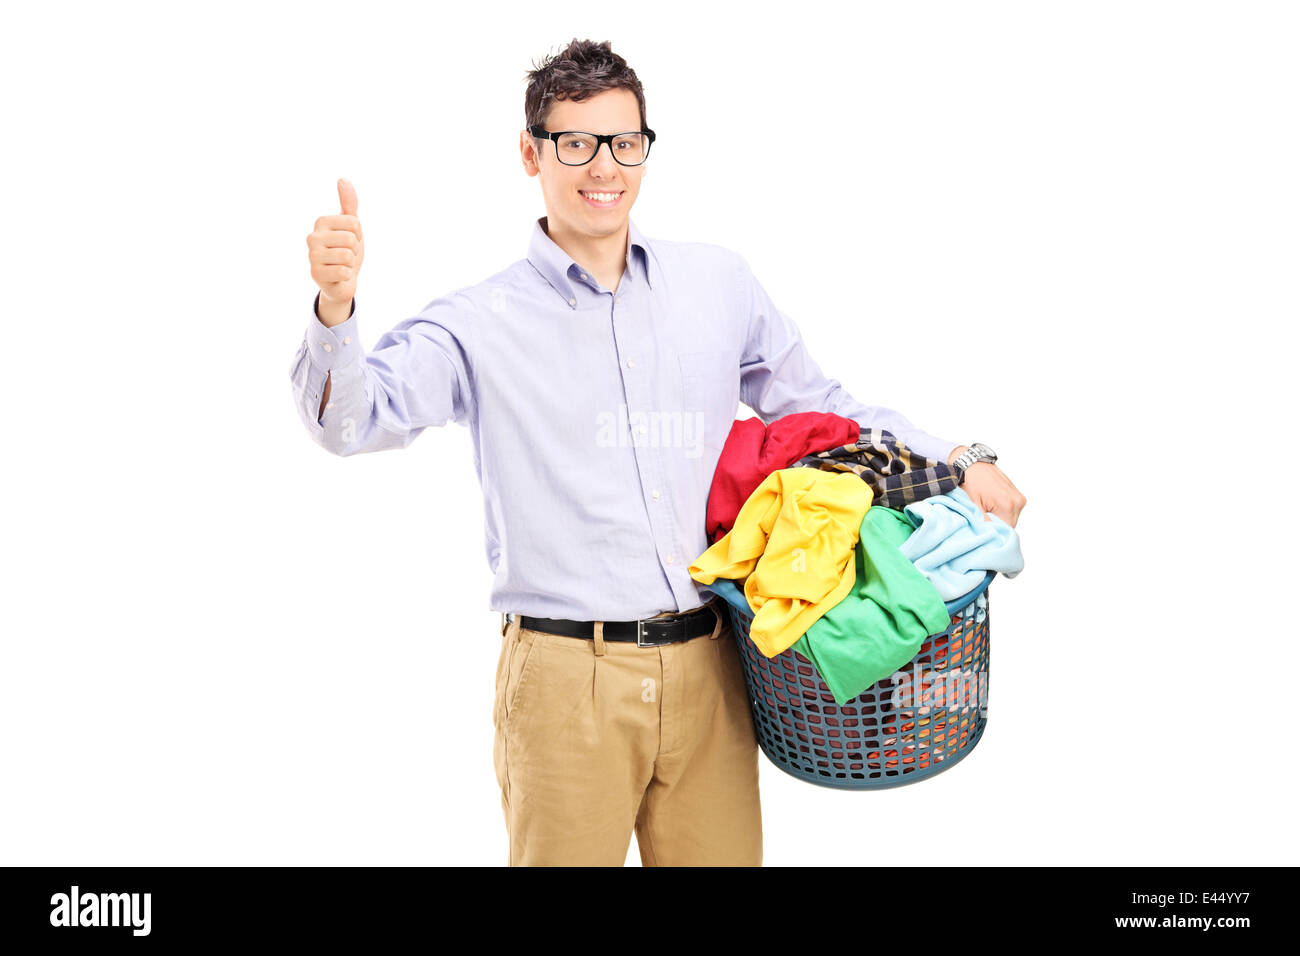 Man holding a laundry basket and giving thumb up Stock Photo